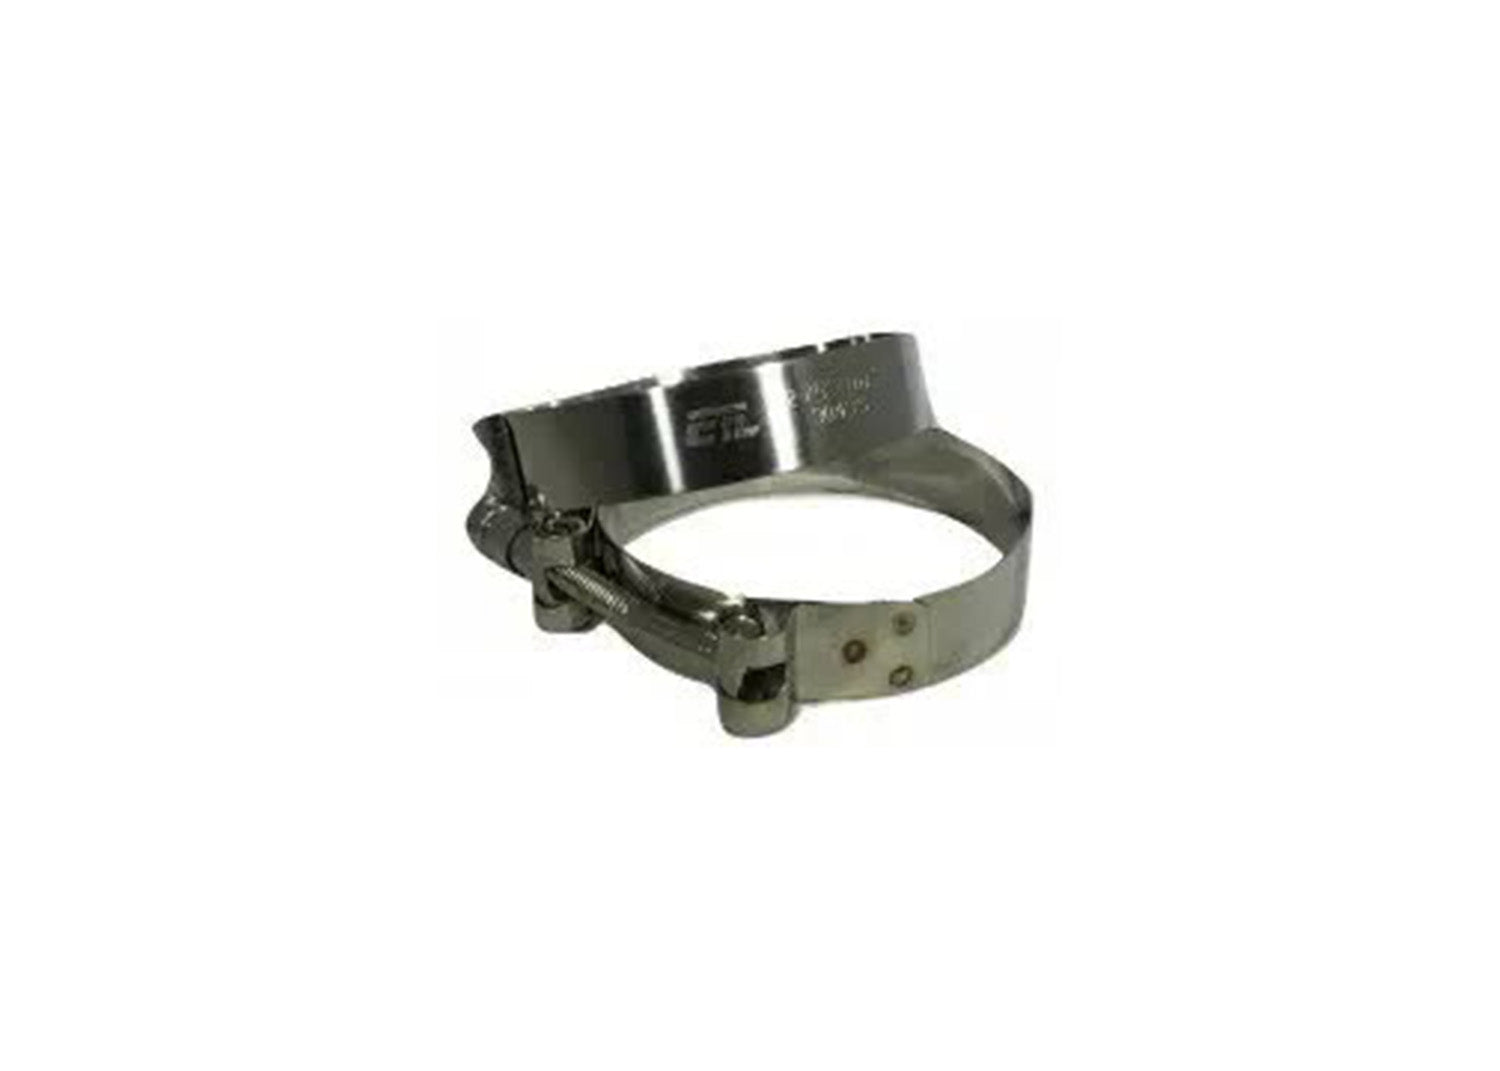 T-Bolt Clamp for use with 3.00" or 3.25" Inside Diameter Hose Coupling Part number 221009